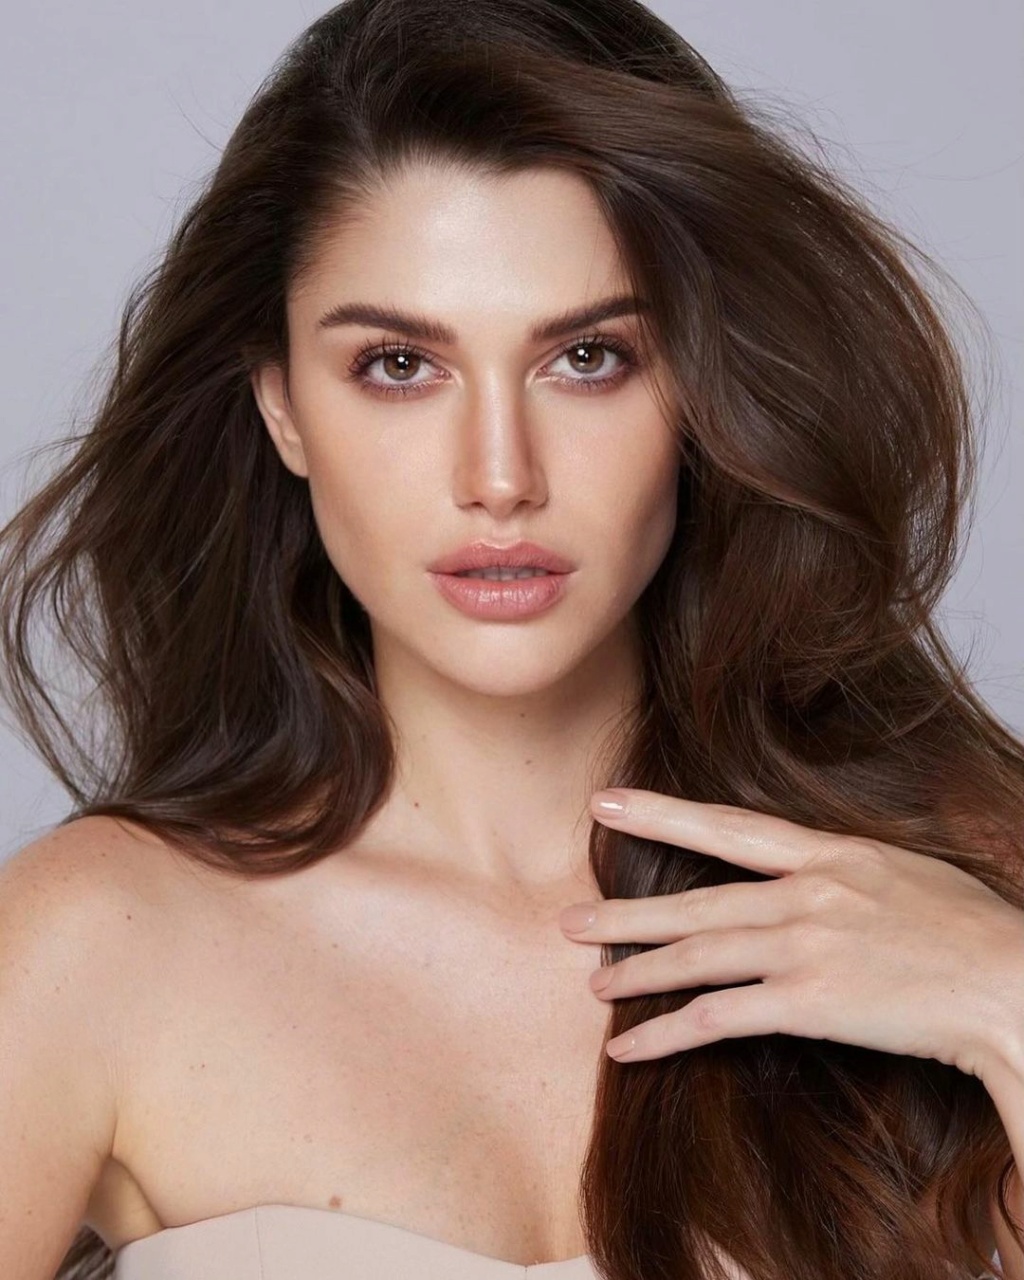 The Official Thread Of MISS GRAND INTERNATIONAL 2022 : ISABELLA MENIN from BRAZIL. - Page 2 33407511